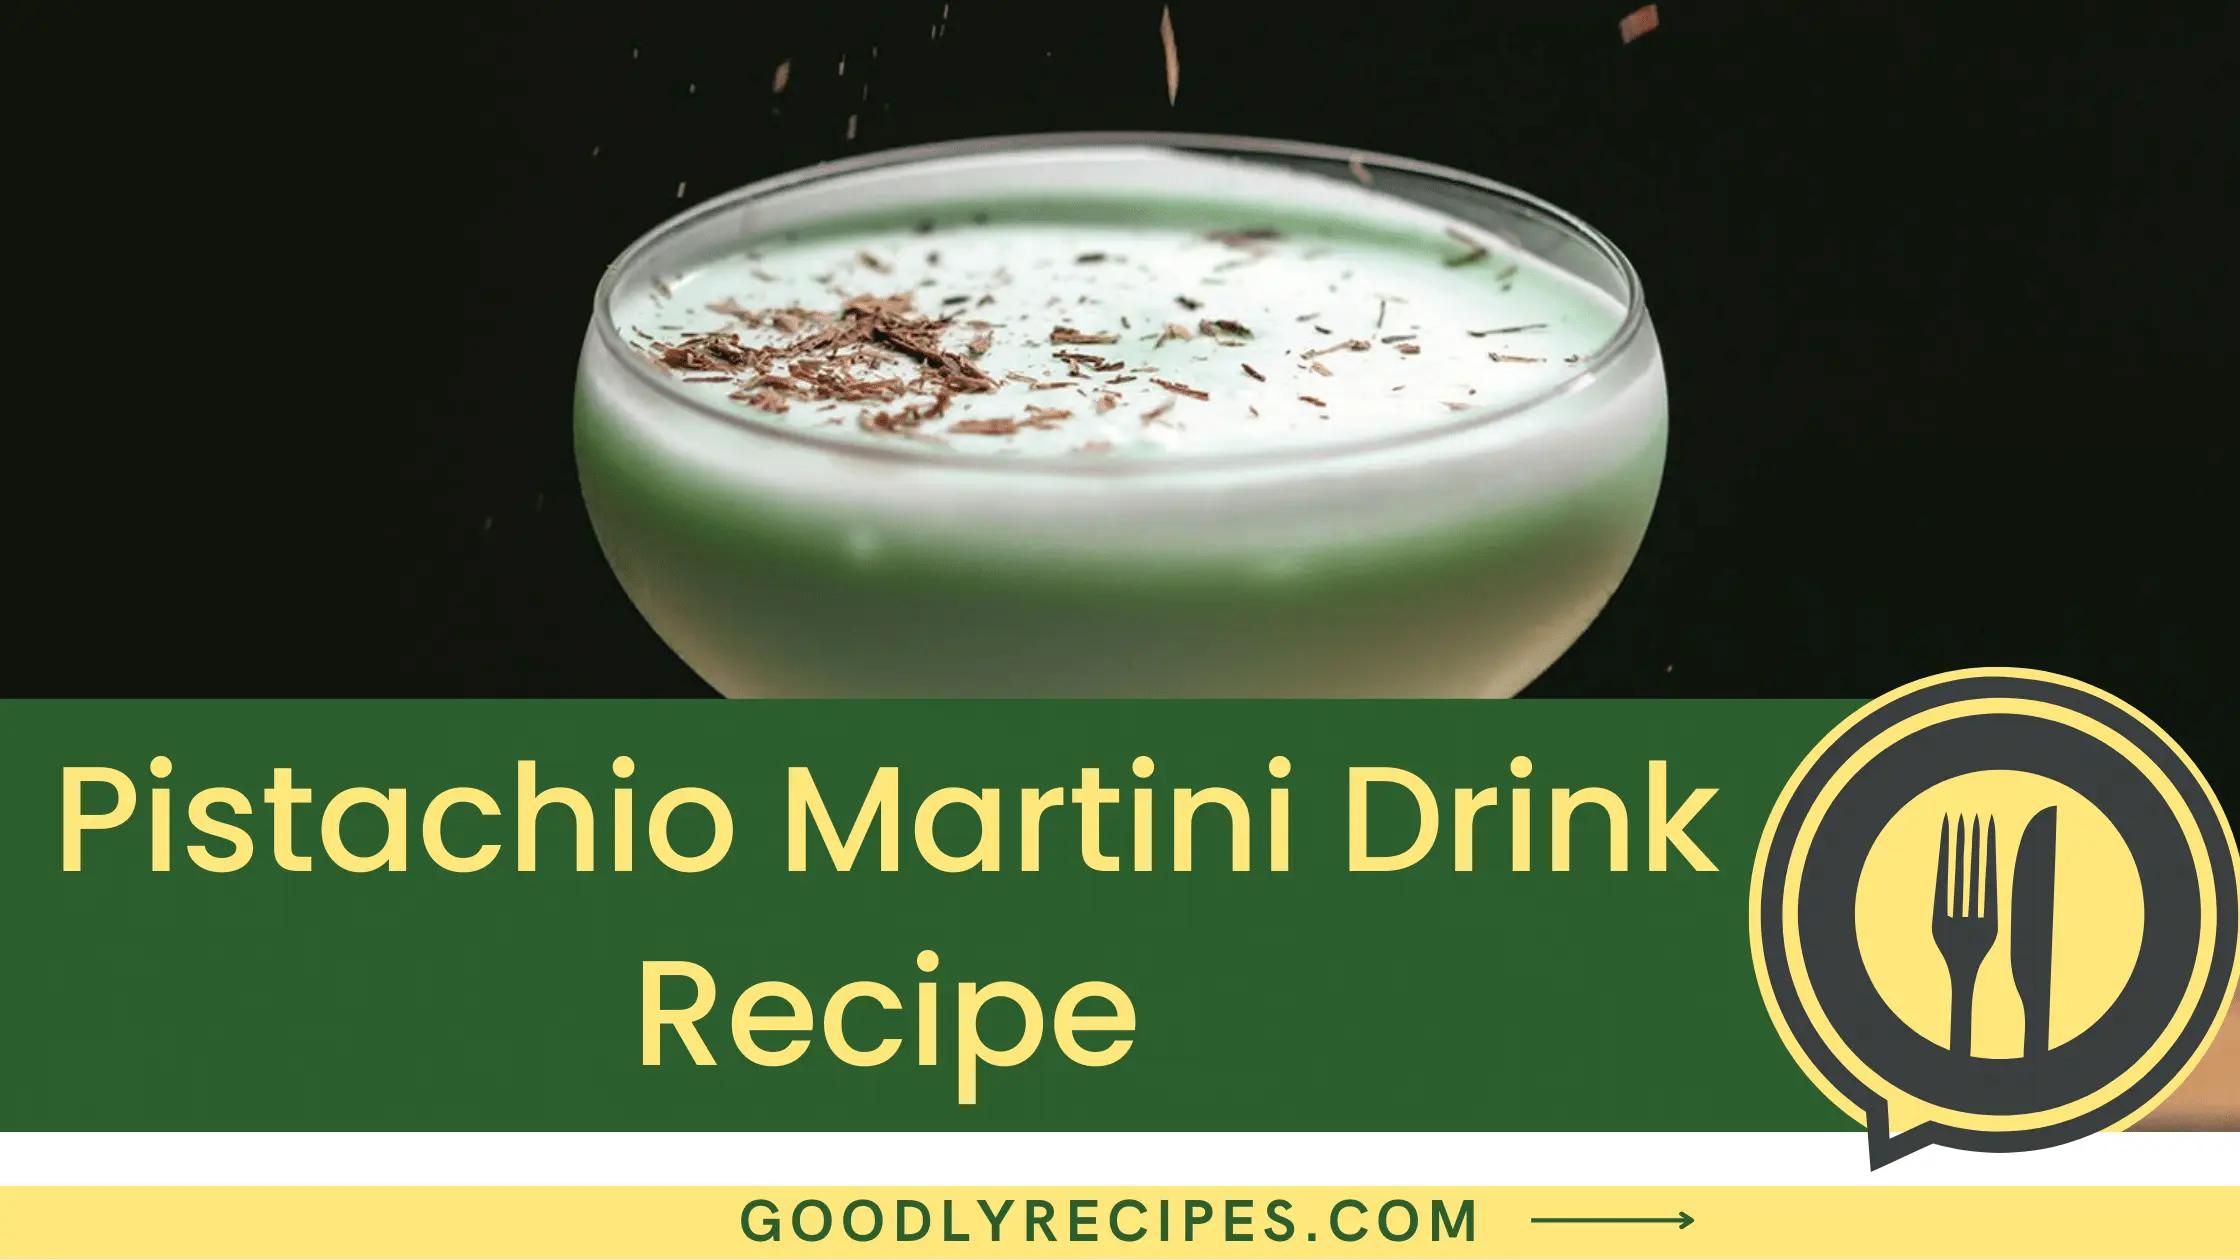 What is Pistachio Martini Drink?